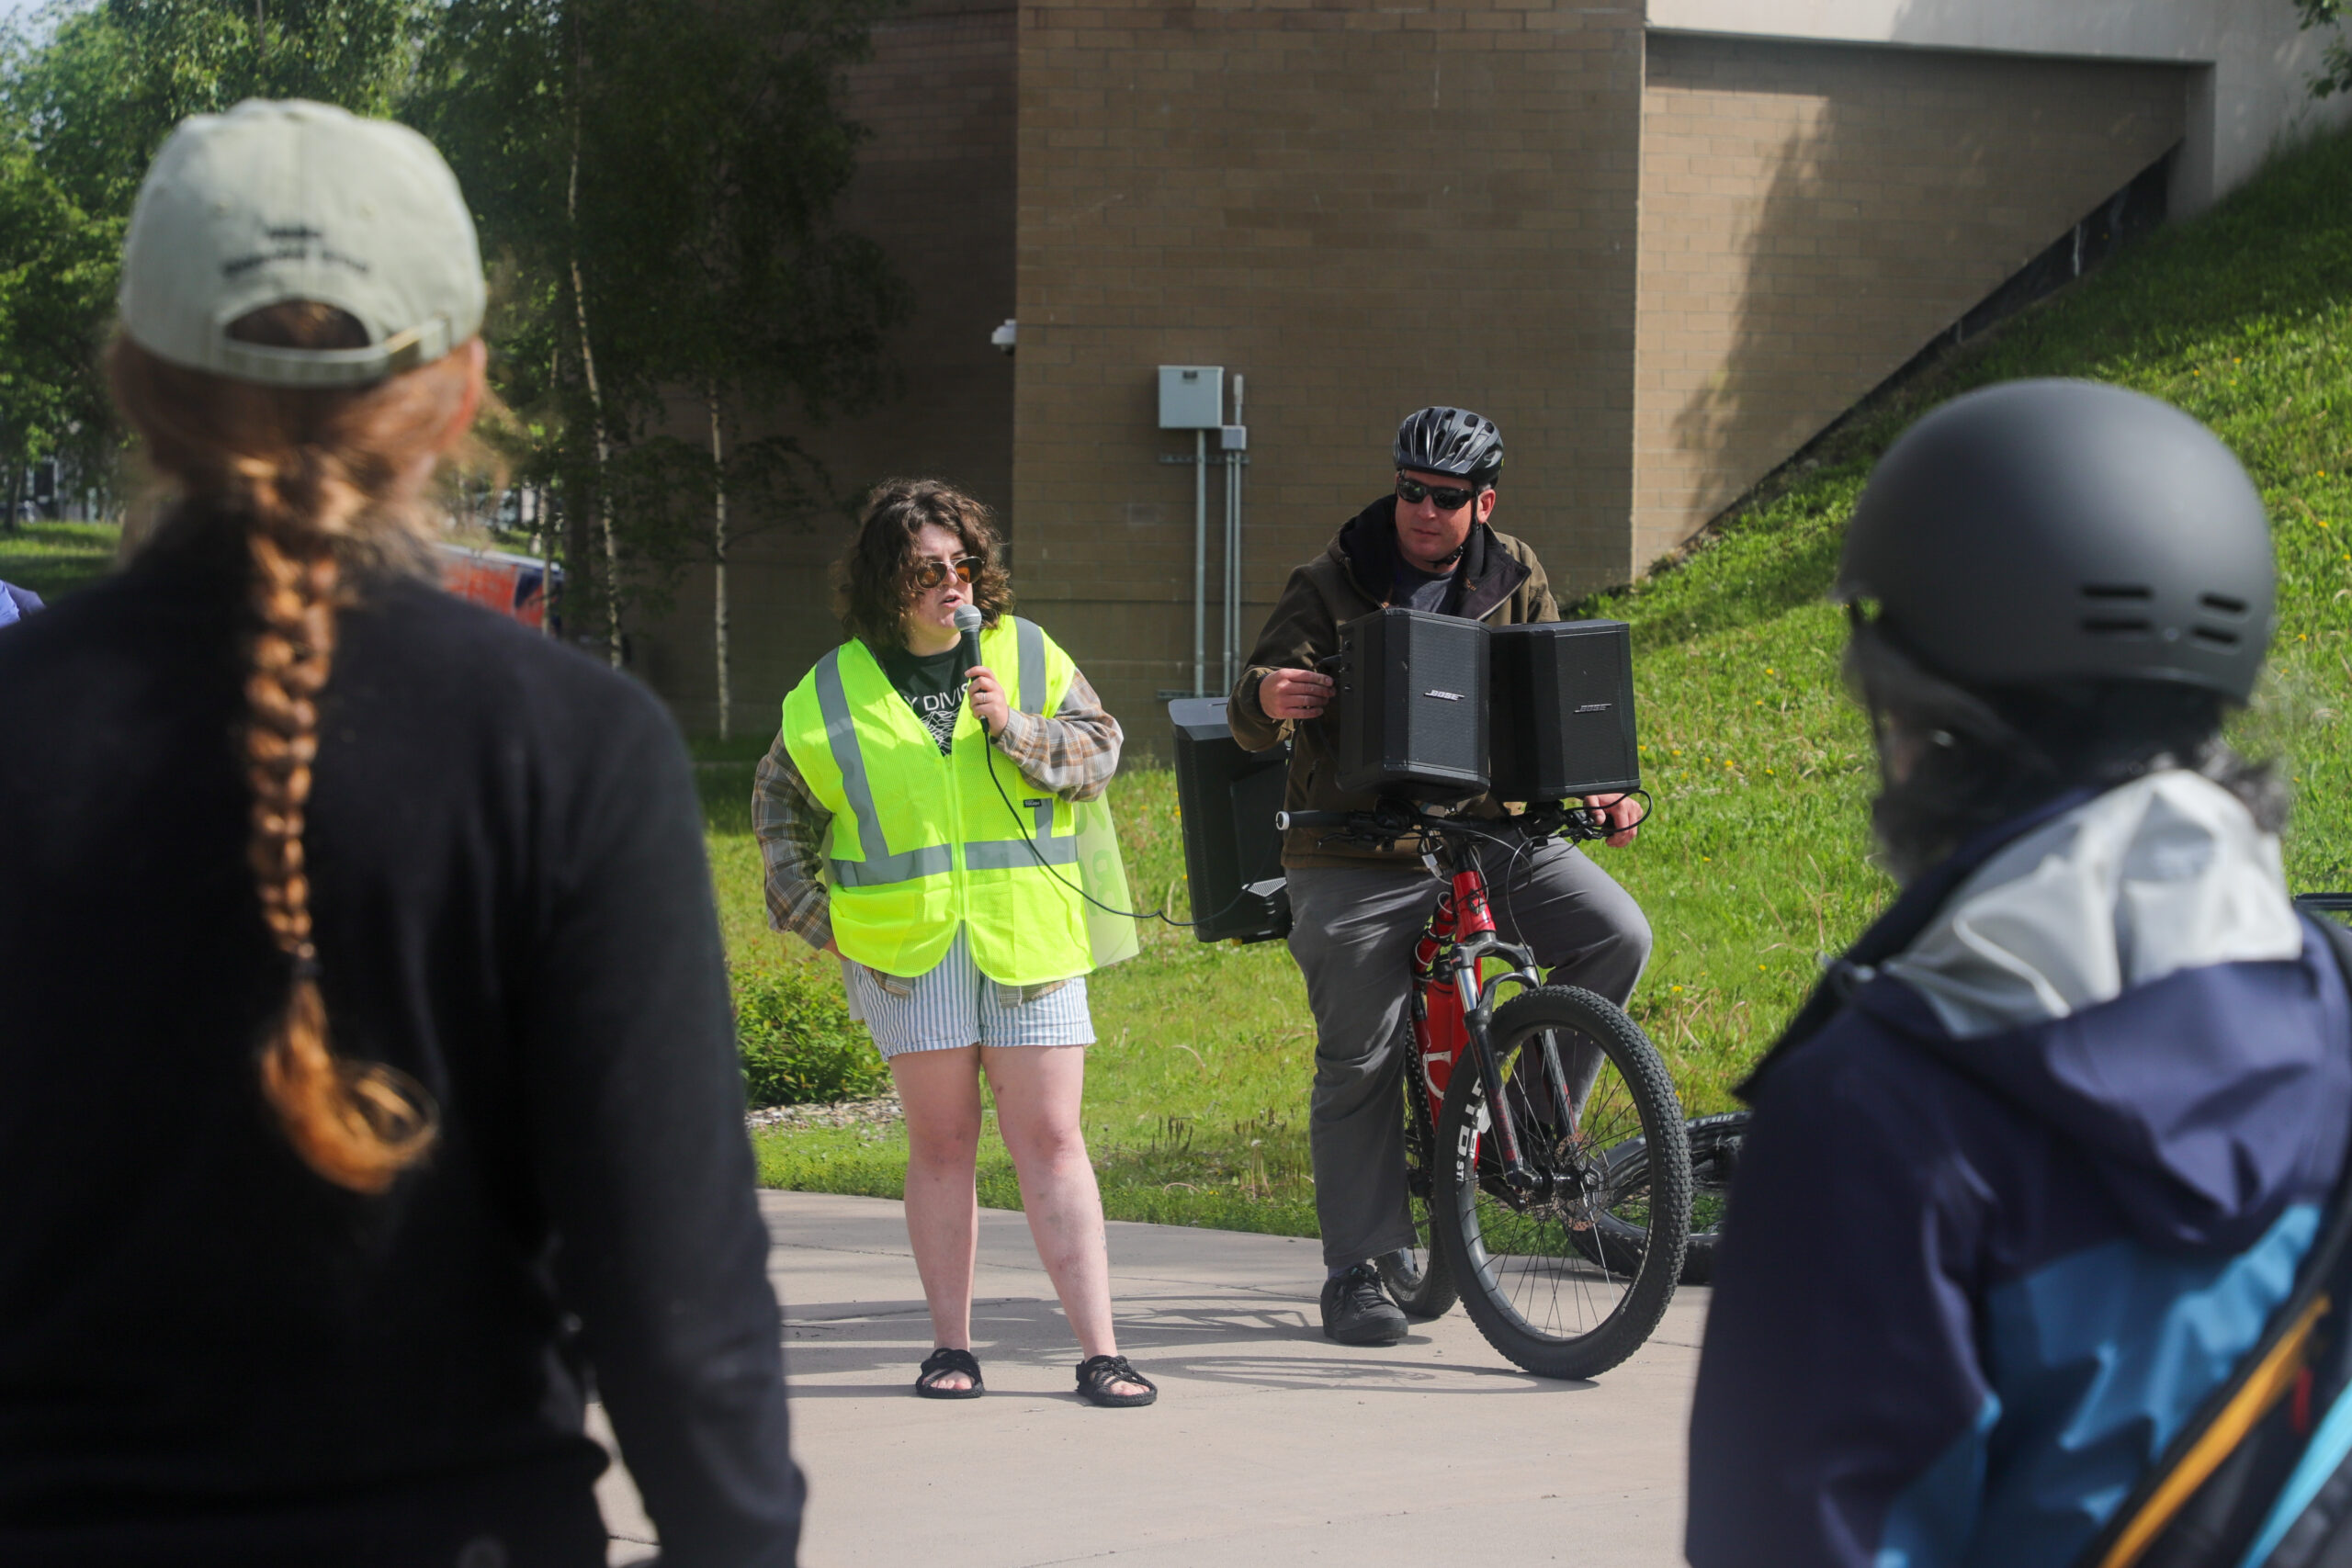 A woman in a high vis vest with a microphone standing next to a man on a bike with speakers attached to it.